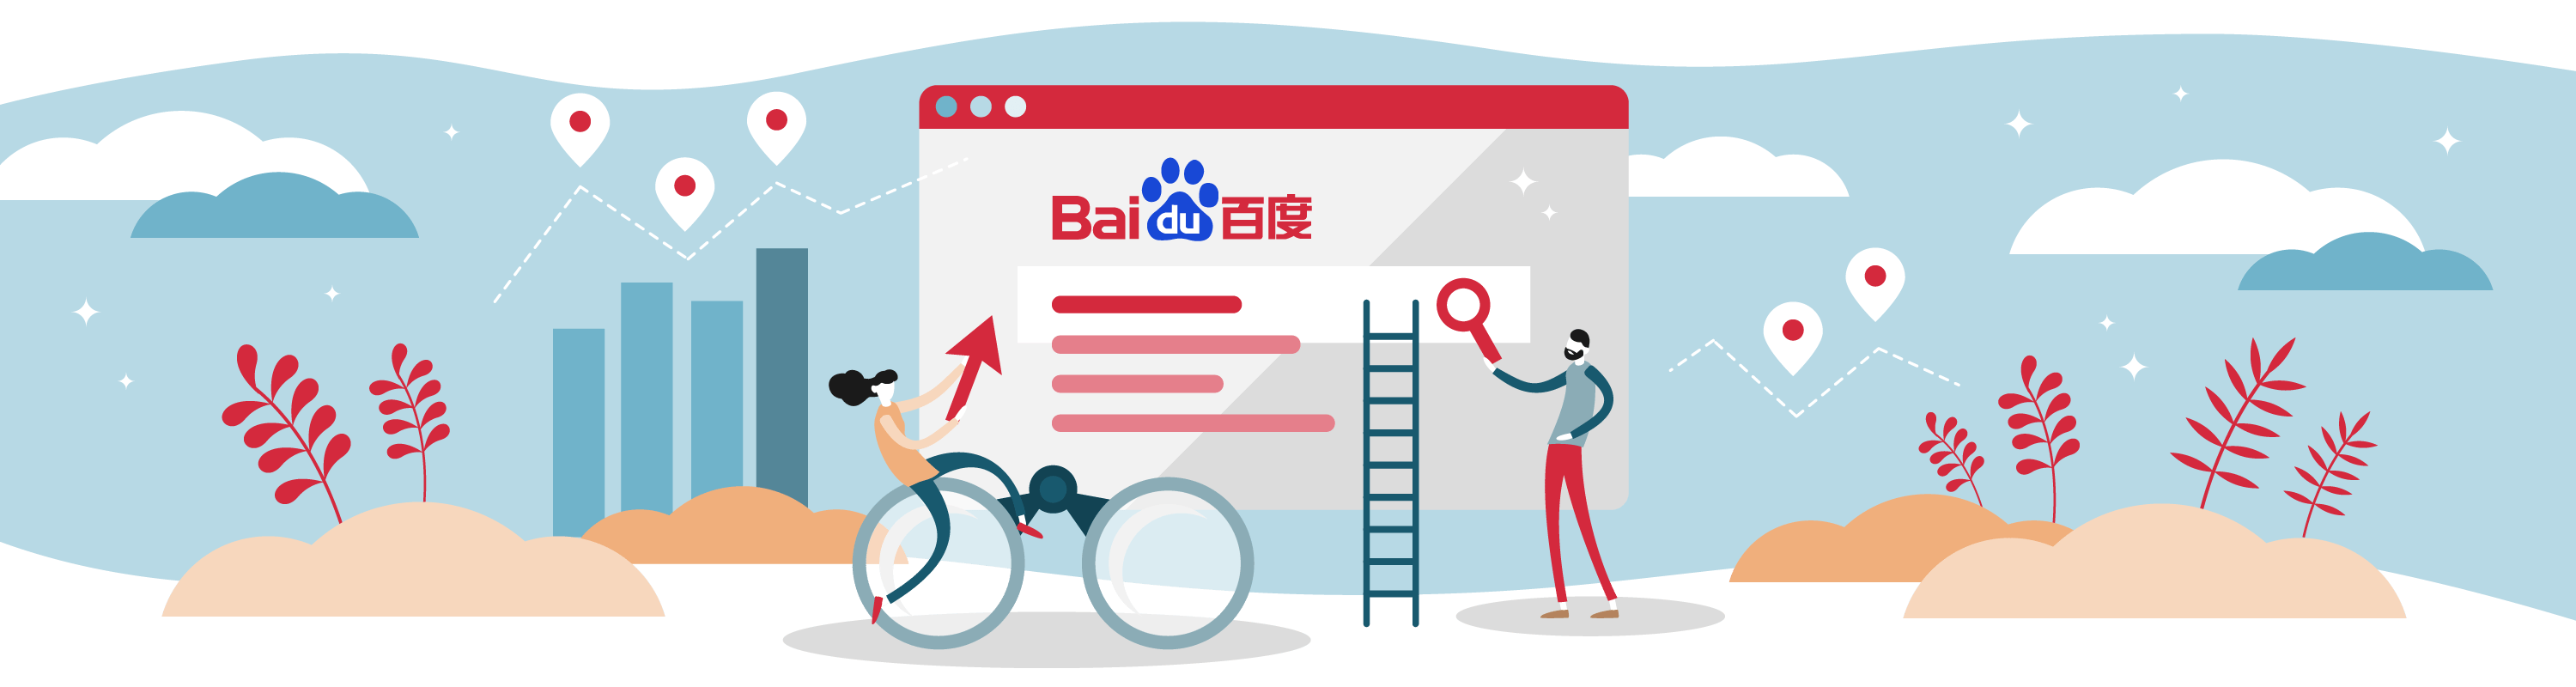 Demystifying Baidu: A Beginner's Guide to China's Search Giant